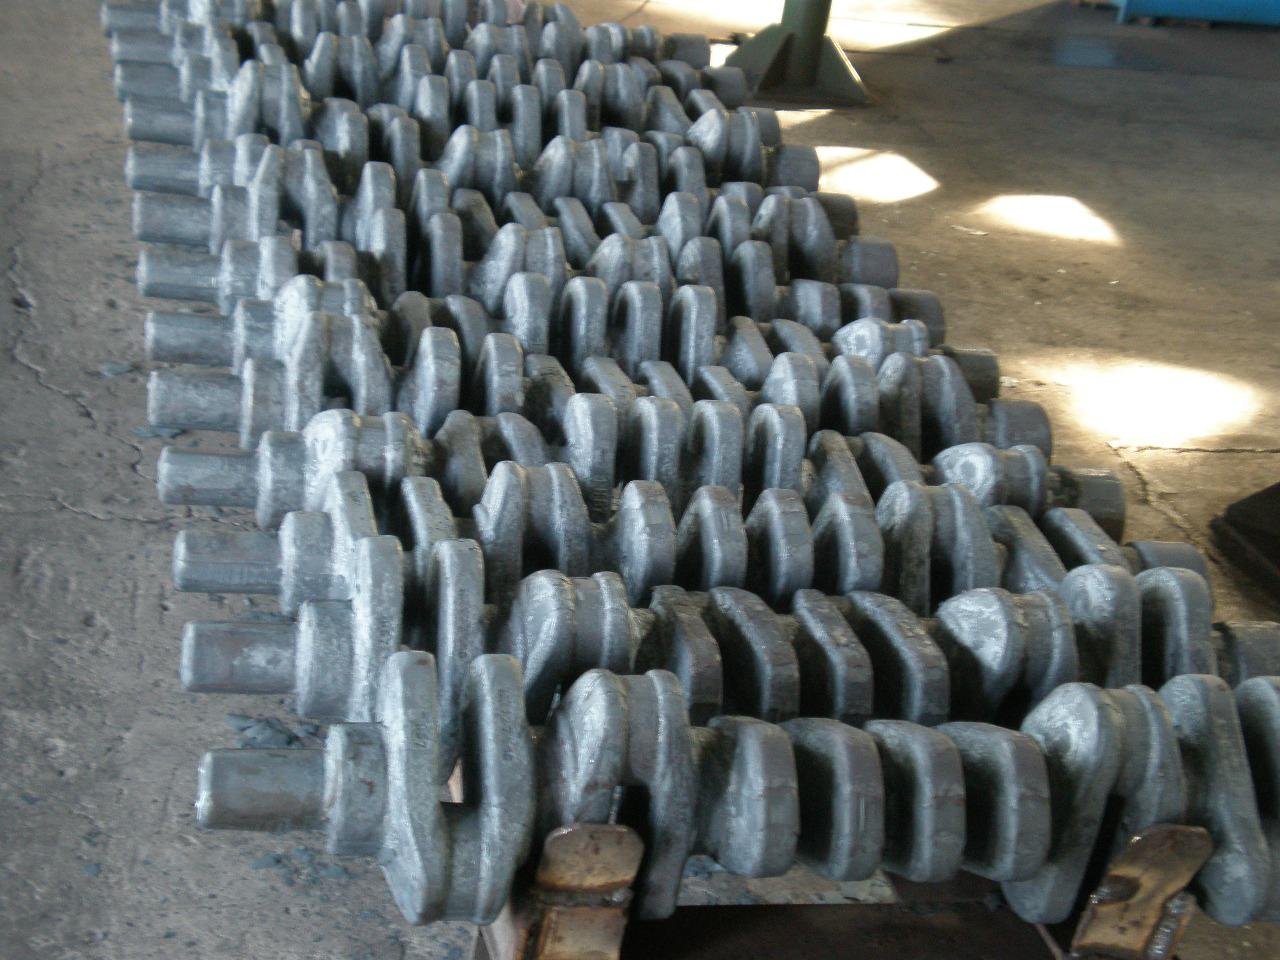 Chinese Hydraulic Drop Forging Hammer 2Tons in Taiwan 4